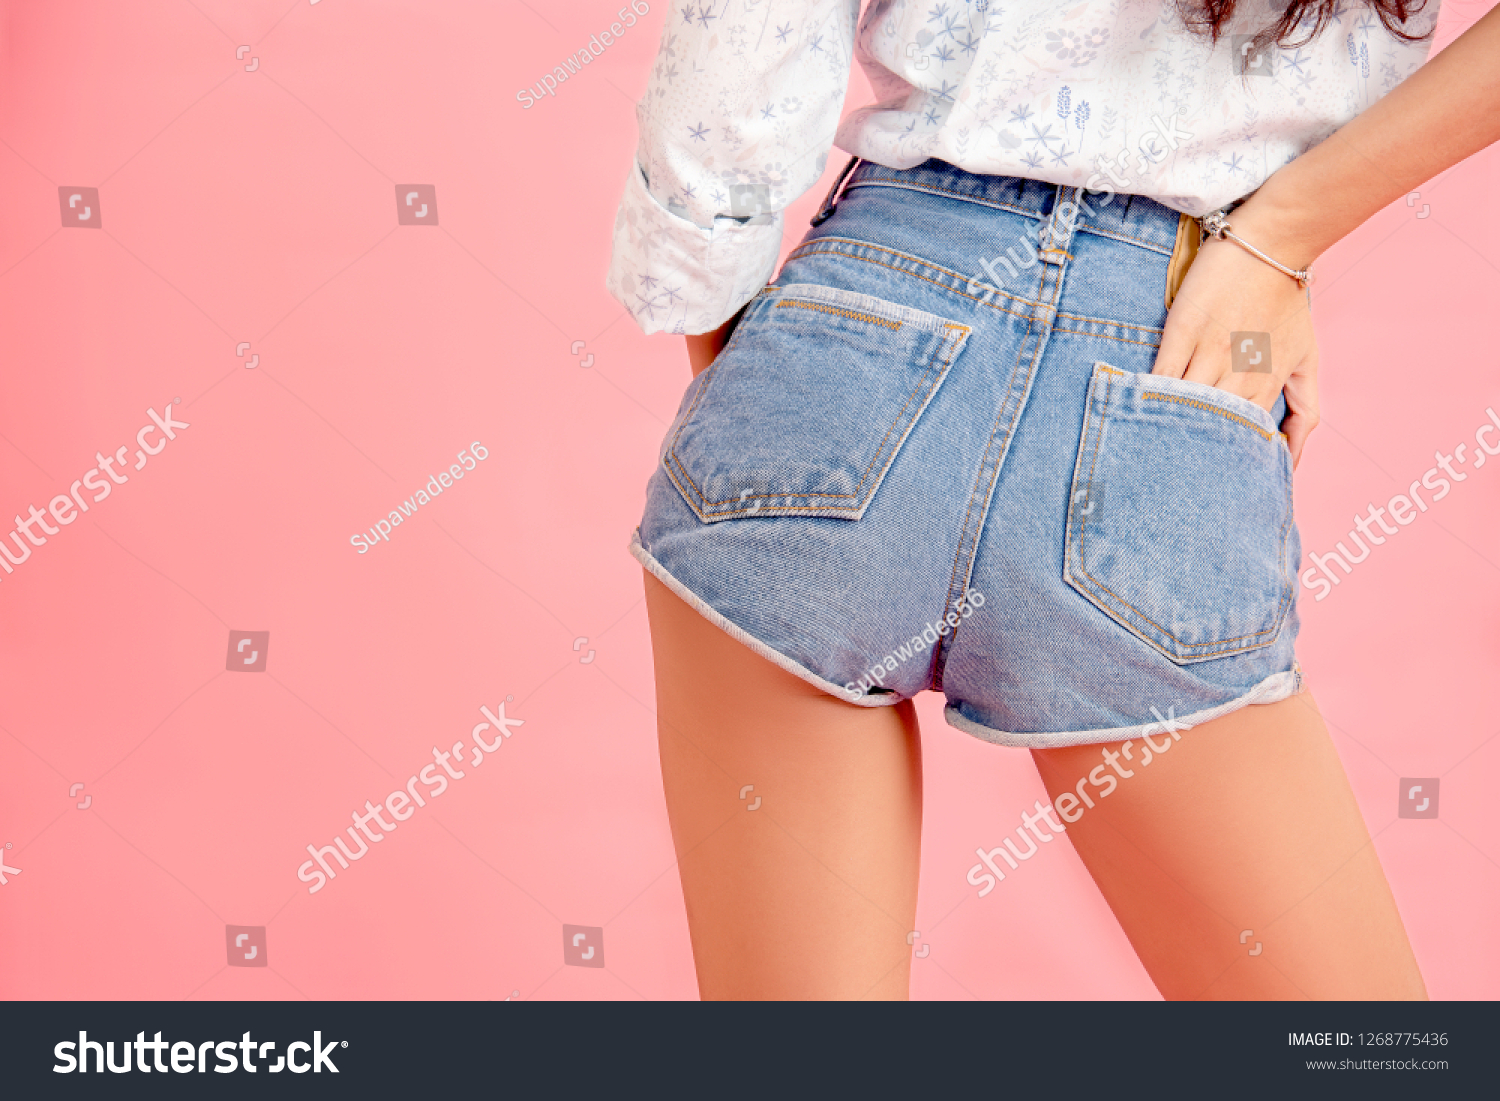 Sexy shorts that look like pants